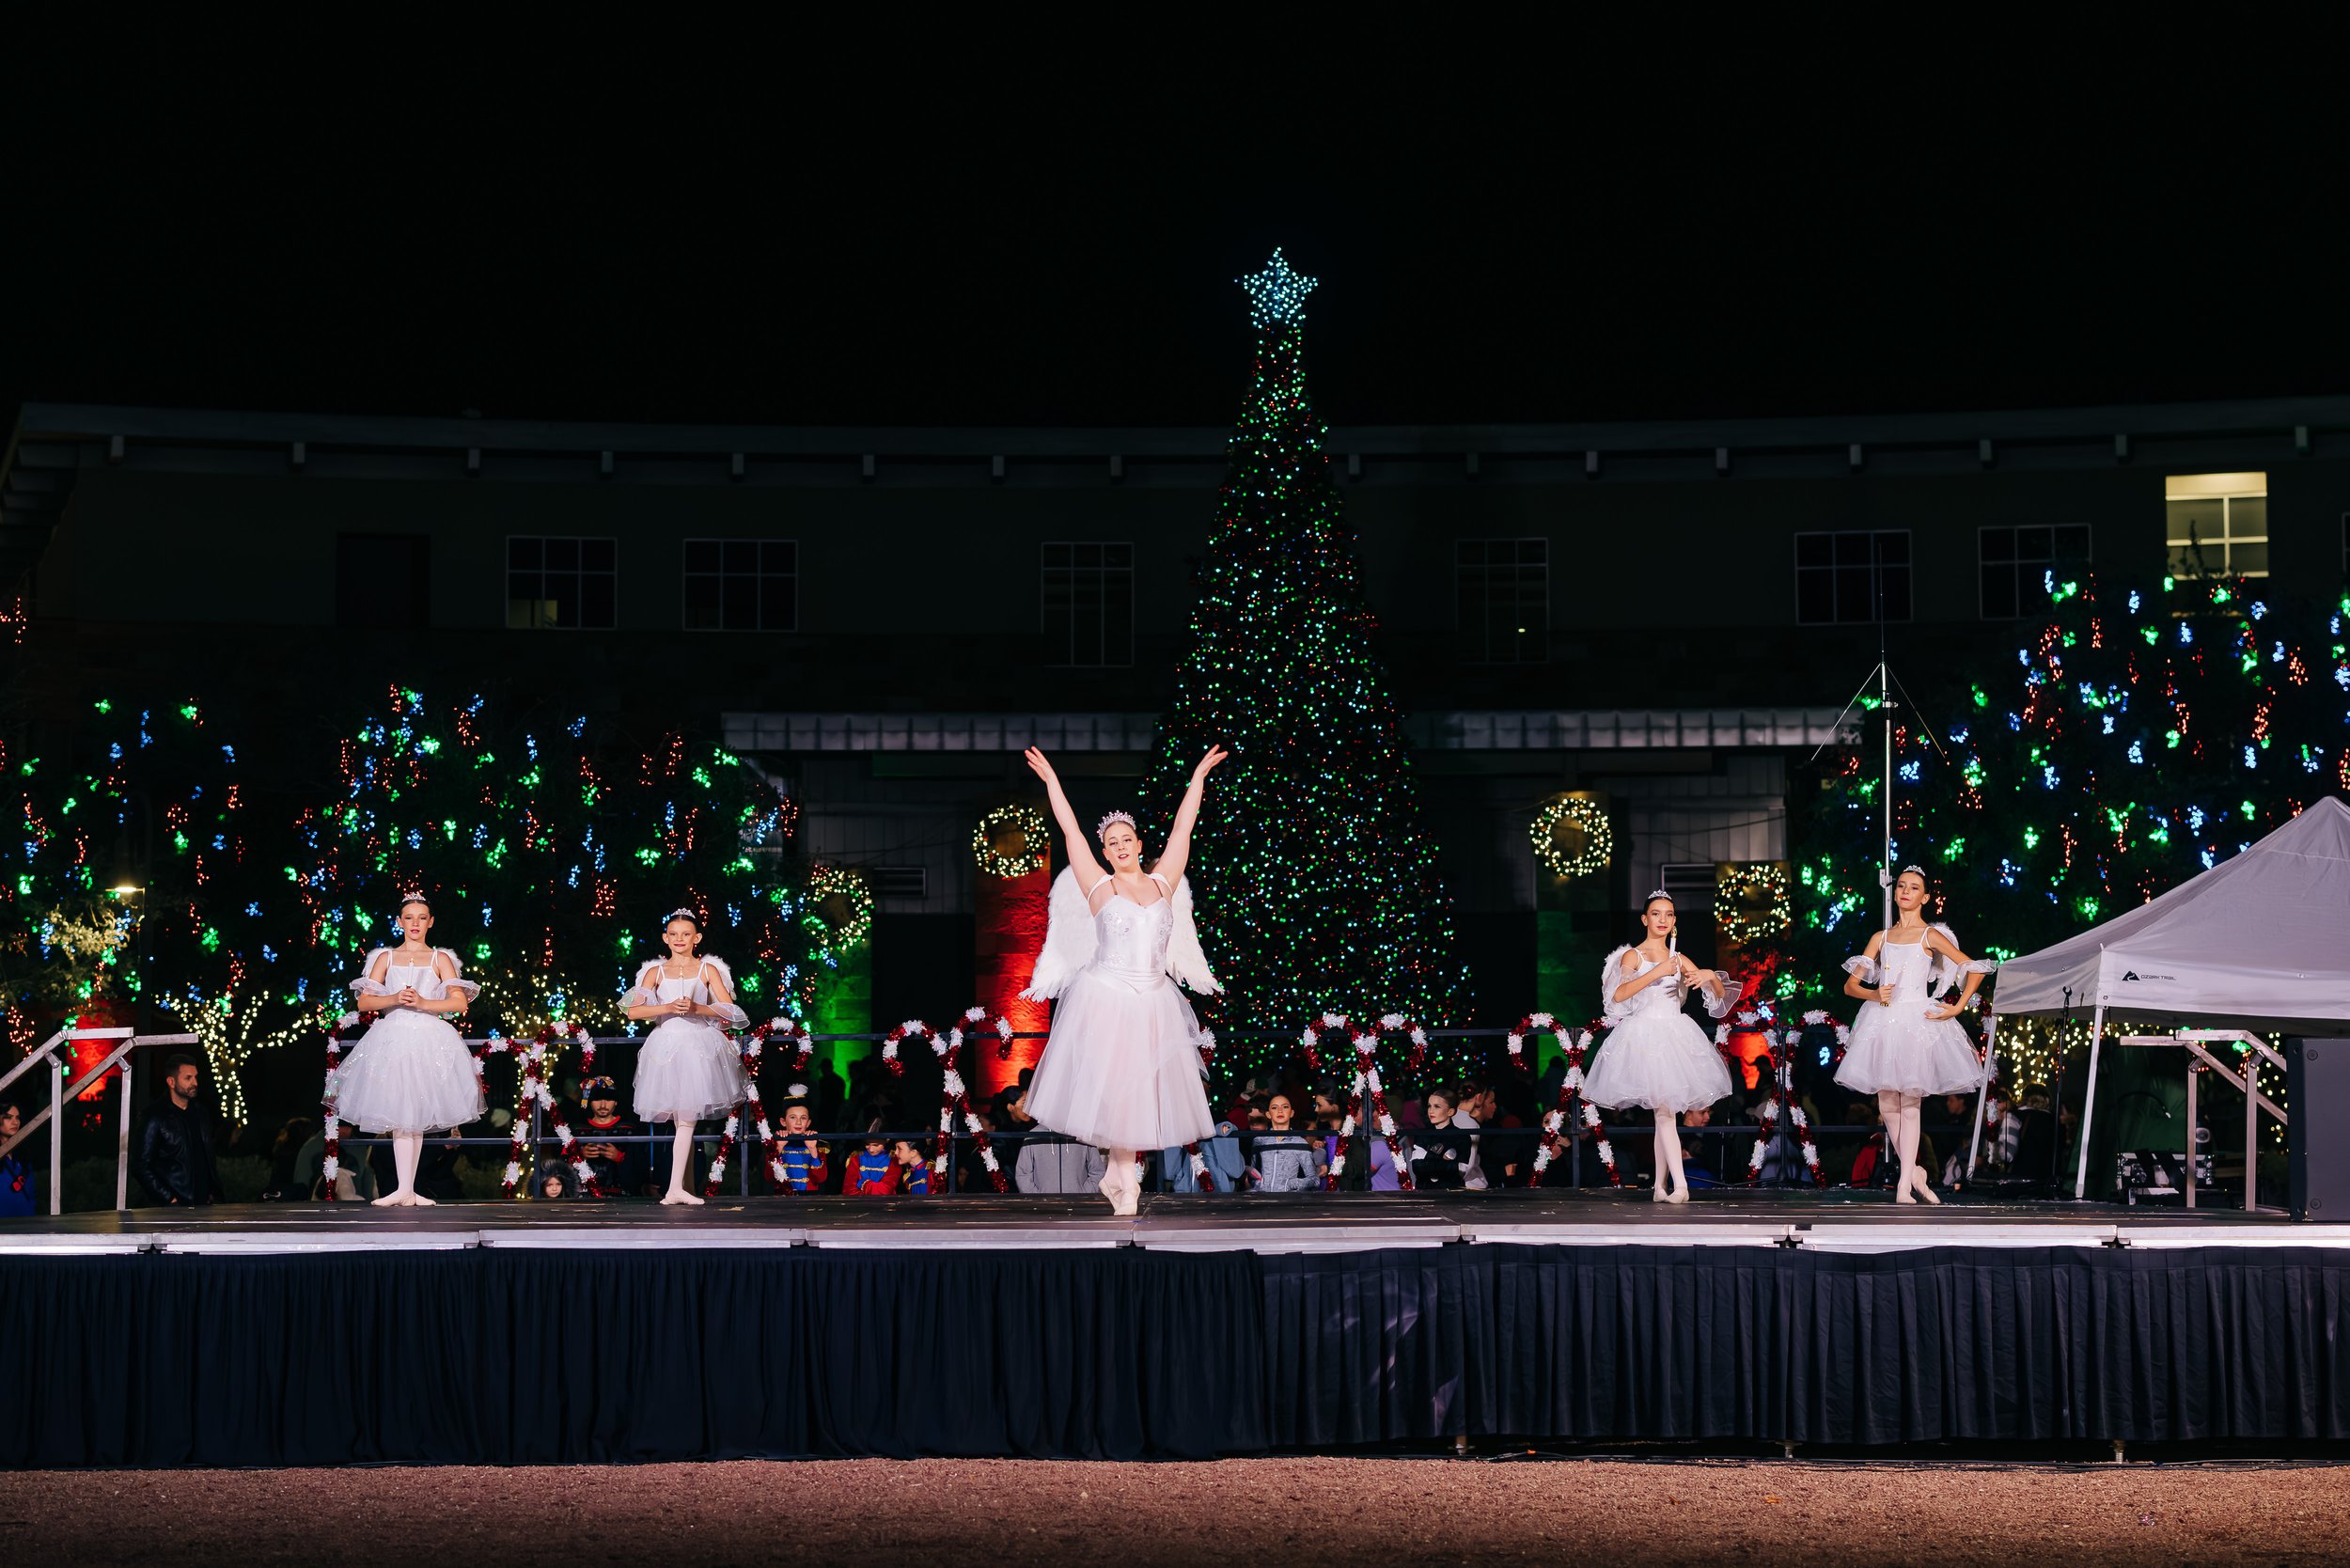 Performers at Holiday Festival